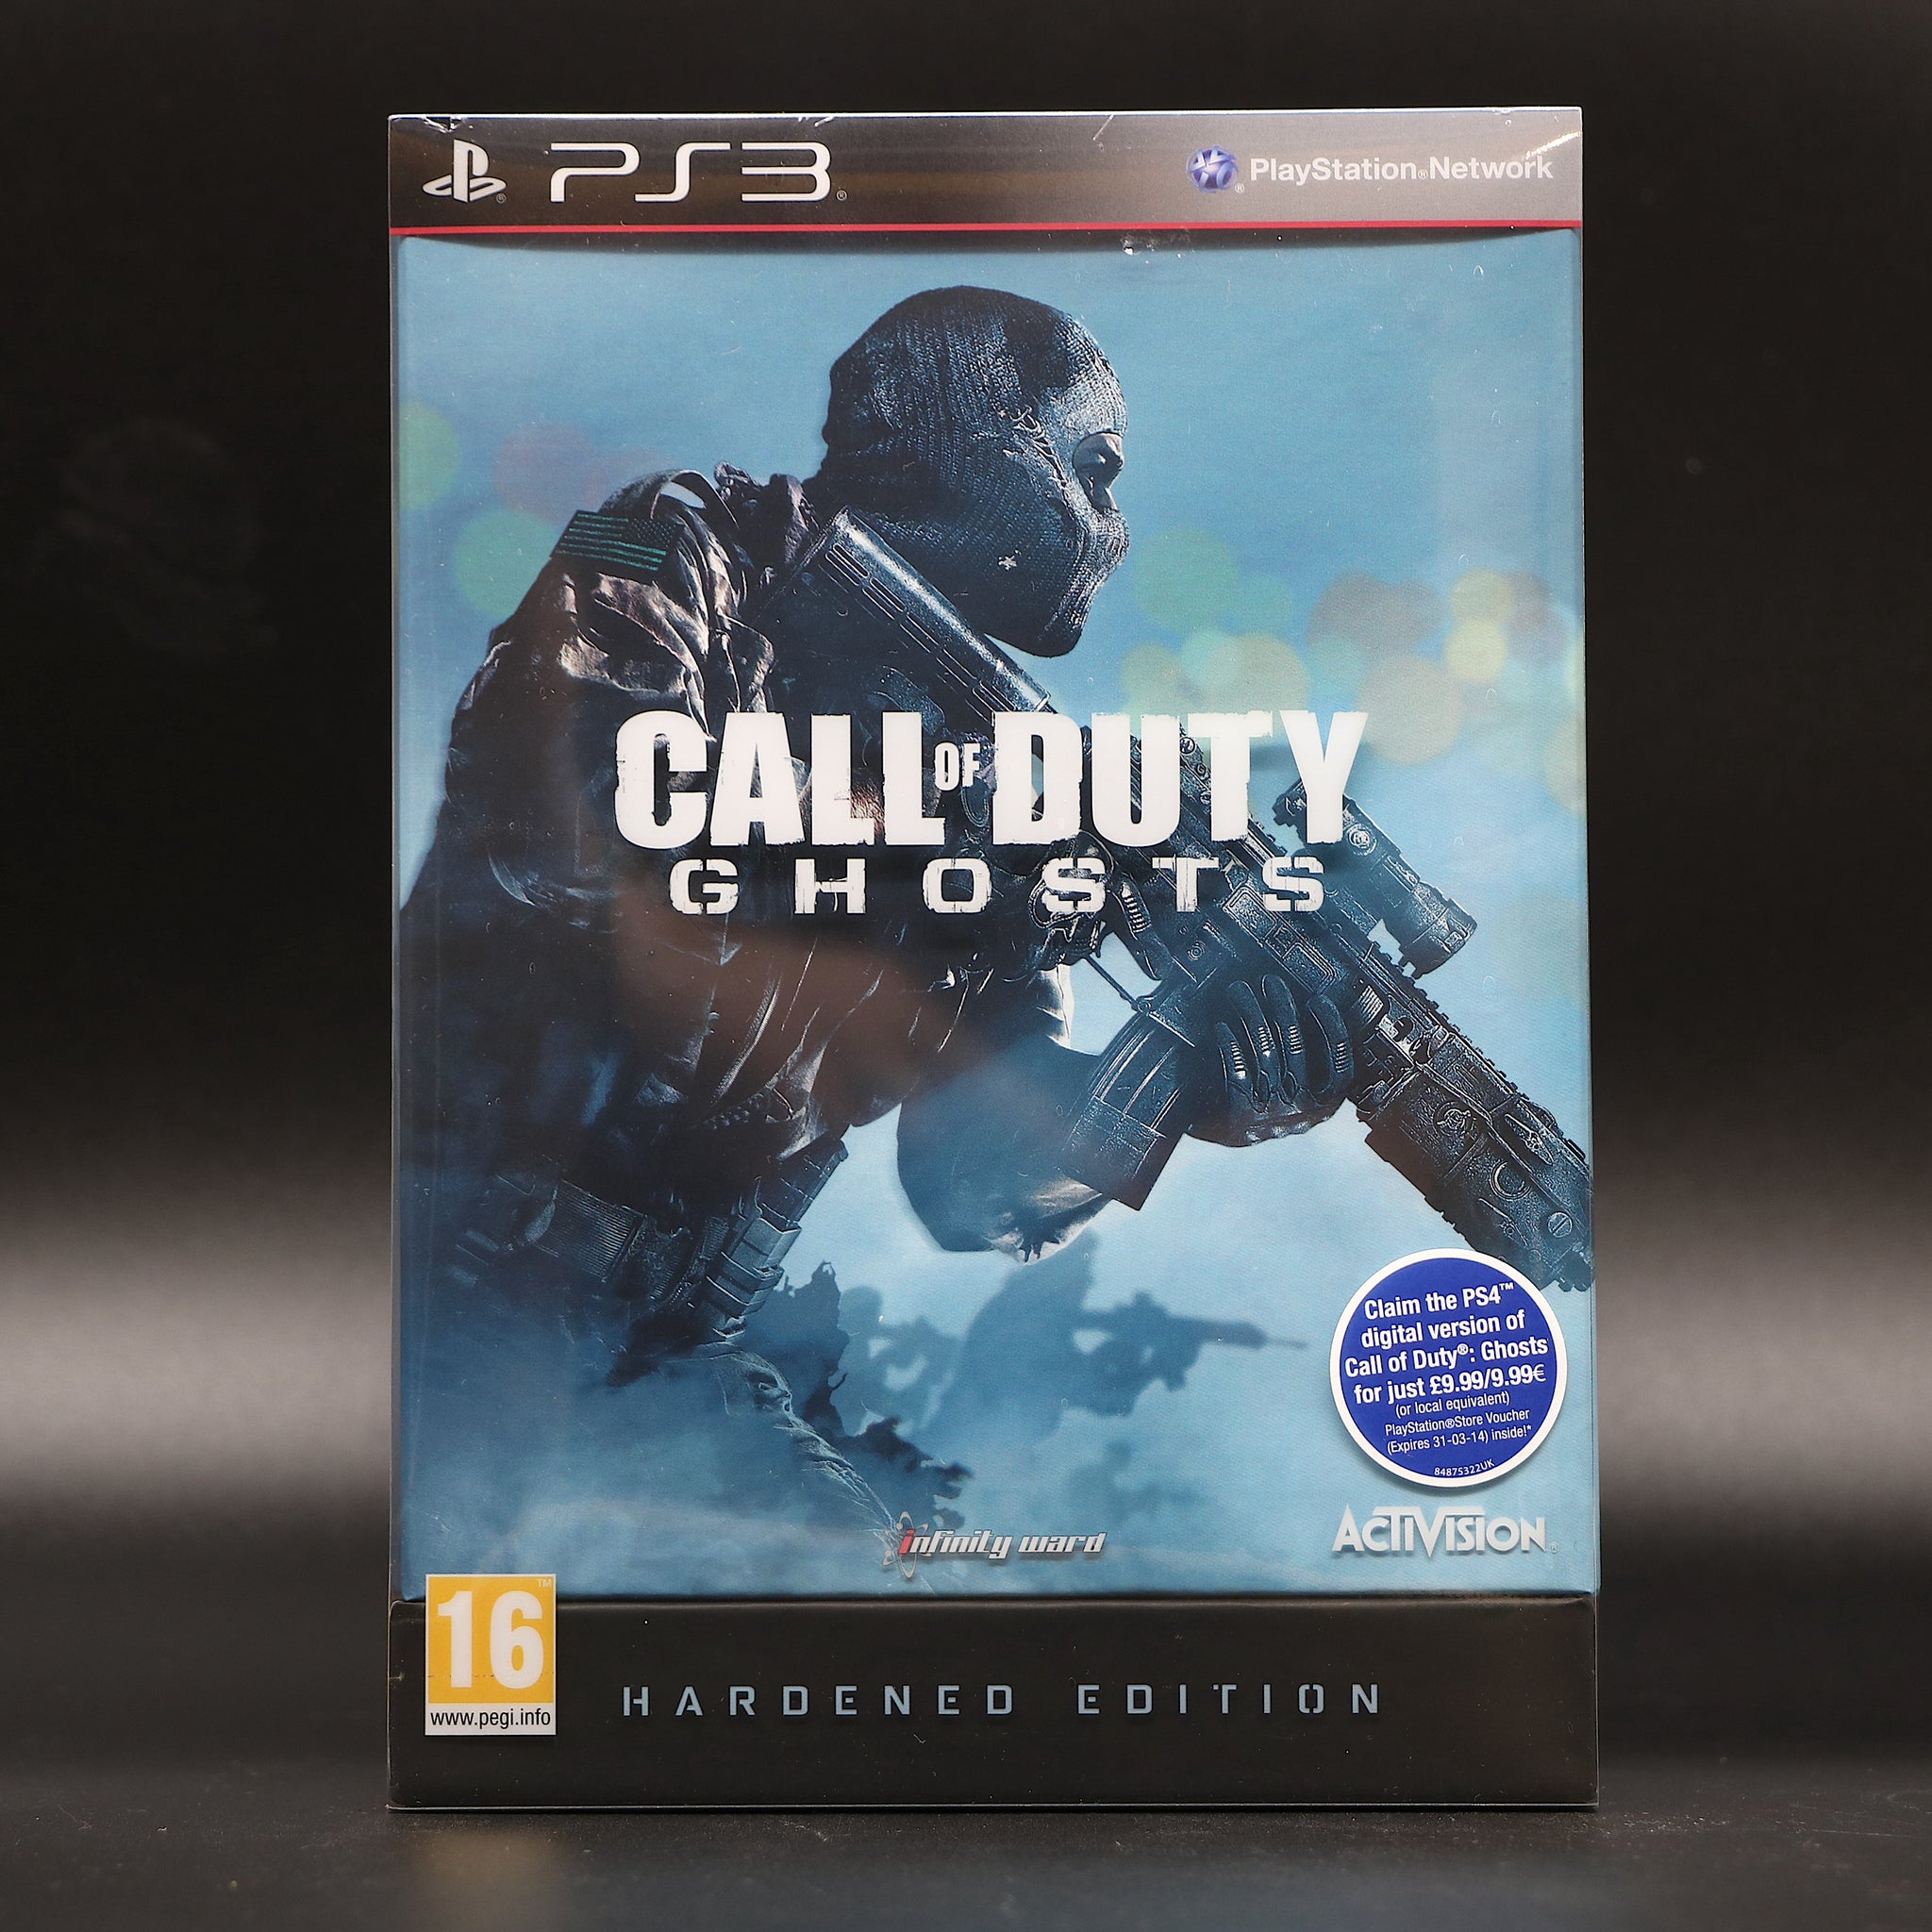 36 x Call Of Duty Ghosts | Hardened Edition | Sony Playstation 3 PS3 Game | New